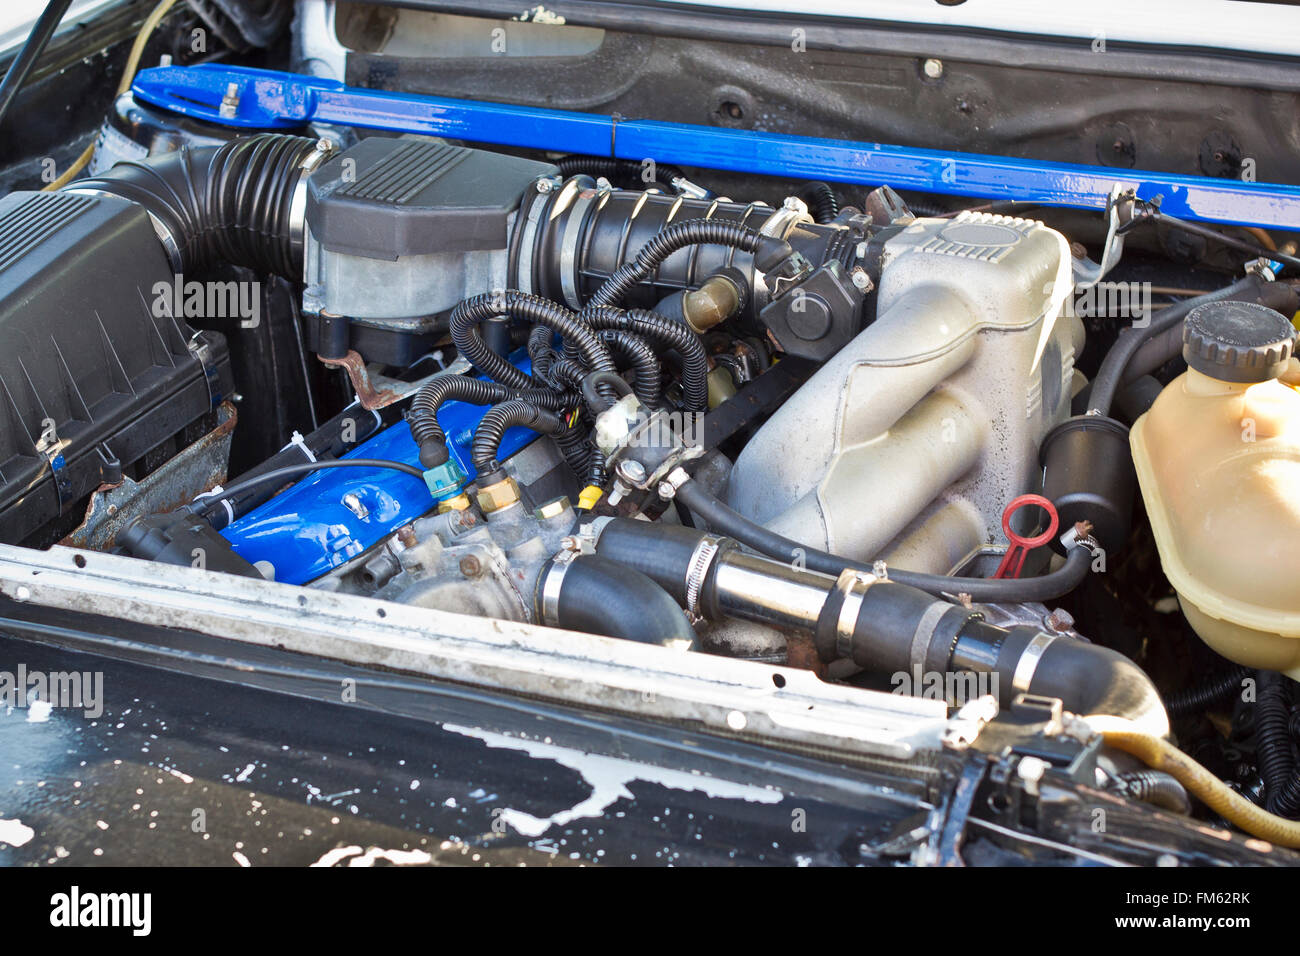 SAINT-PETERSBURG, RUSSIA - AUGUST 3, 2013: Engine of the old-car BMW at the meeting, fans of the Bavarian automaker Stock Photo